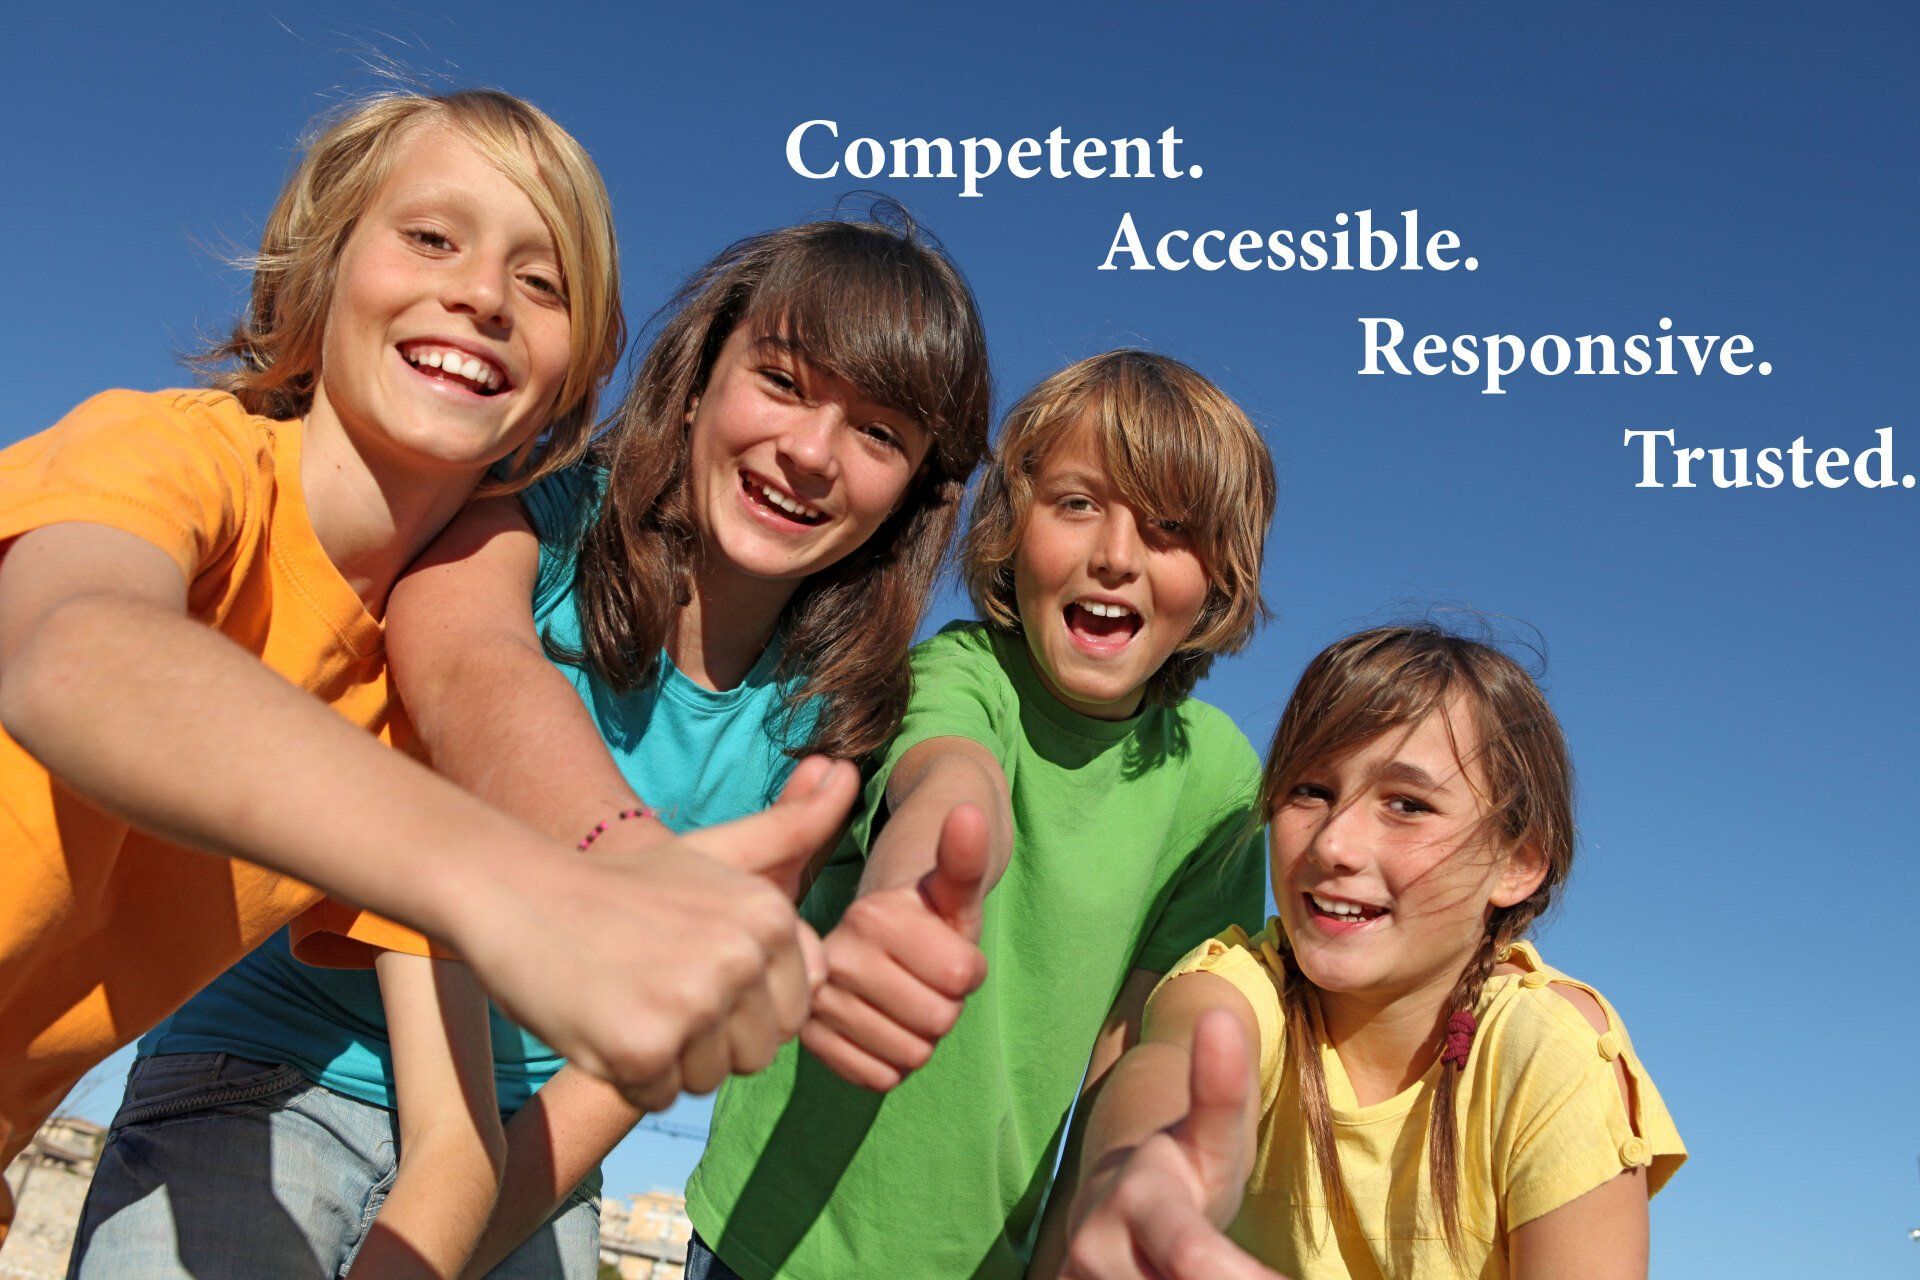 EdCounsel | Our Team is Competent, Accessible, Responsive & Trusted!